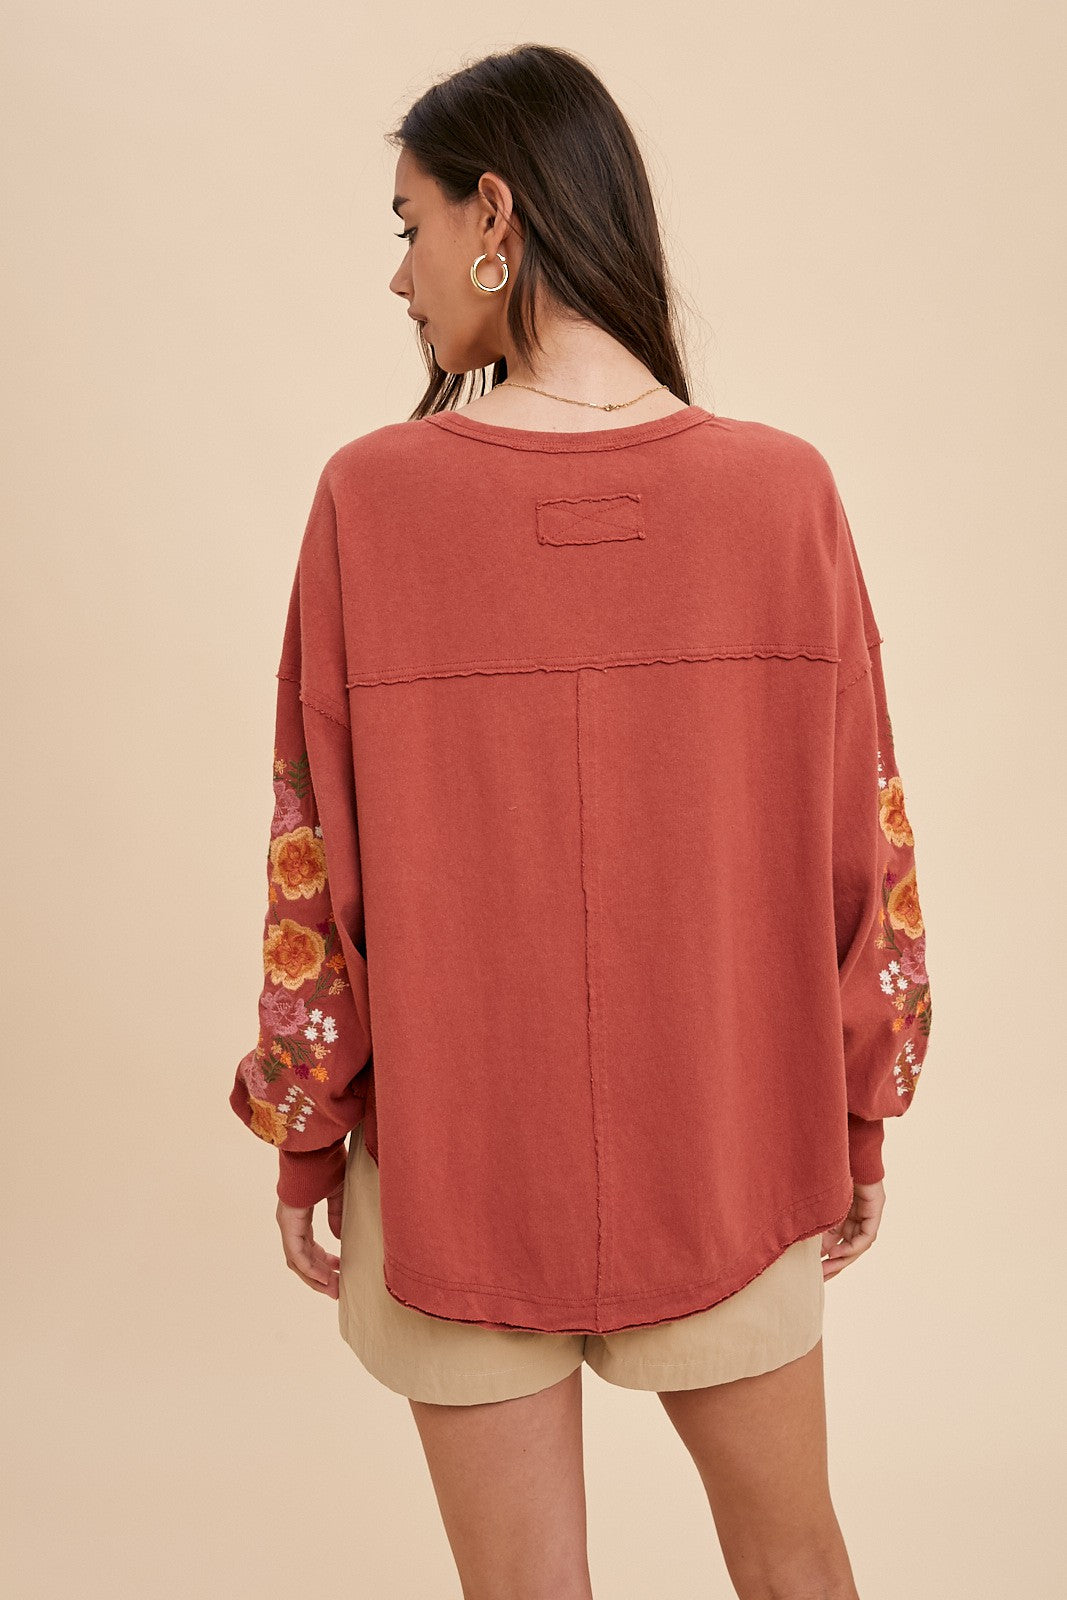 Rust Garment Washed Pullover With Embroidered Sleeves